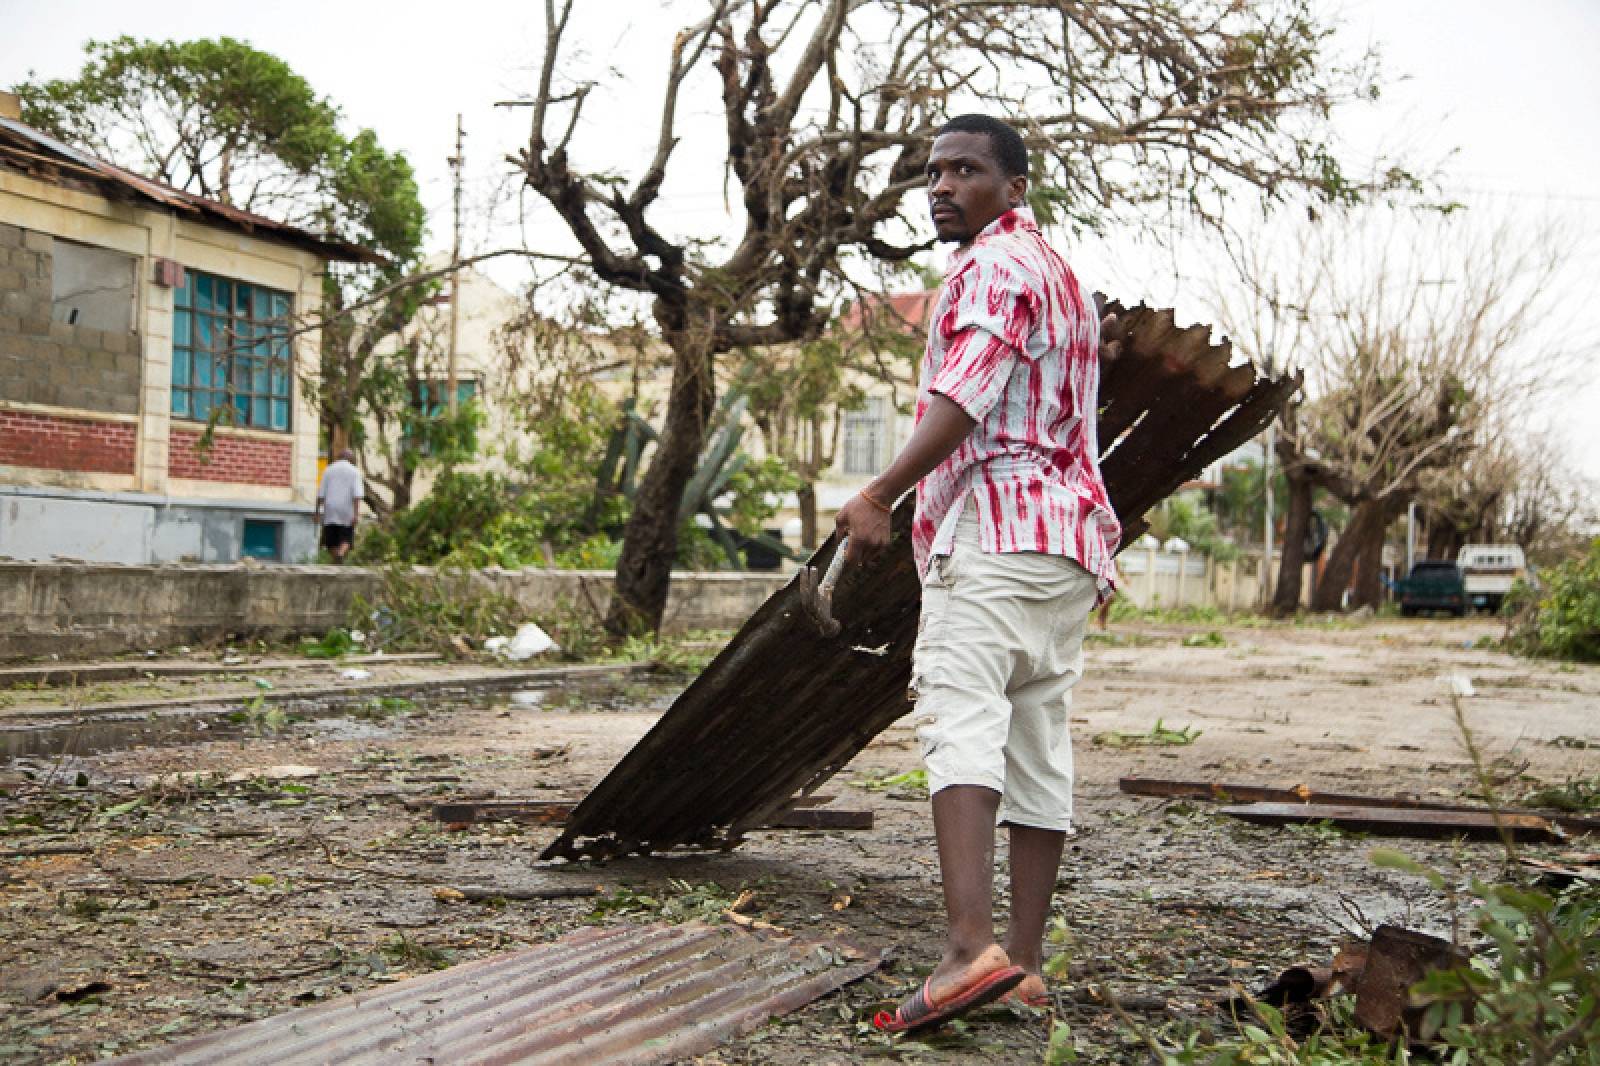 Damage from the Cyclone Idai is seen in Beira